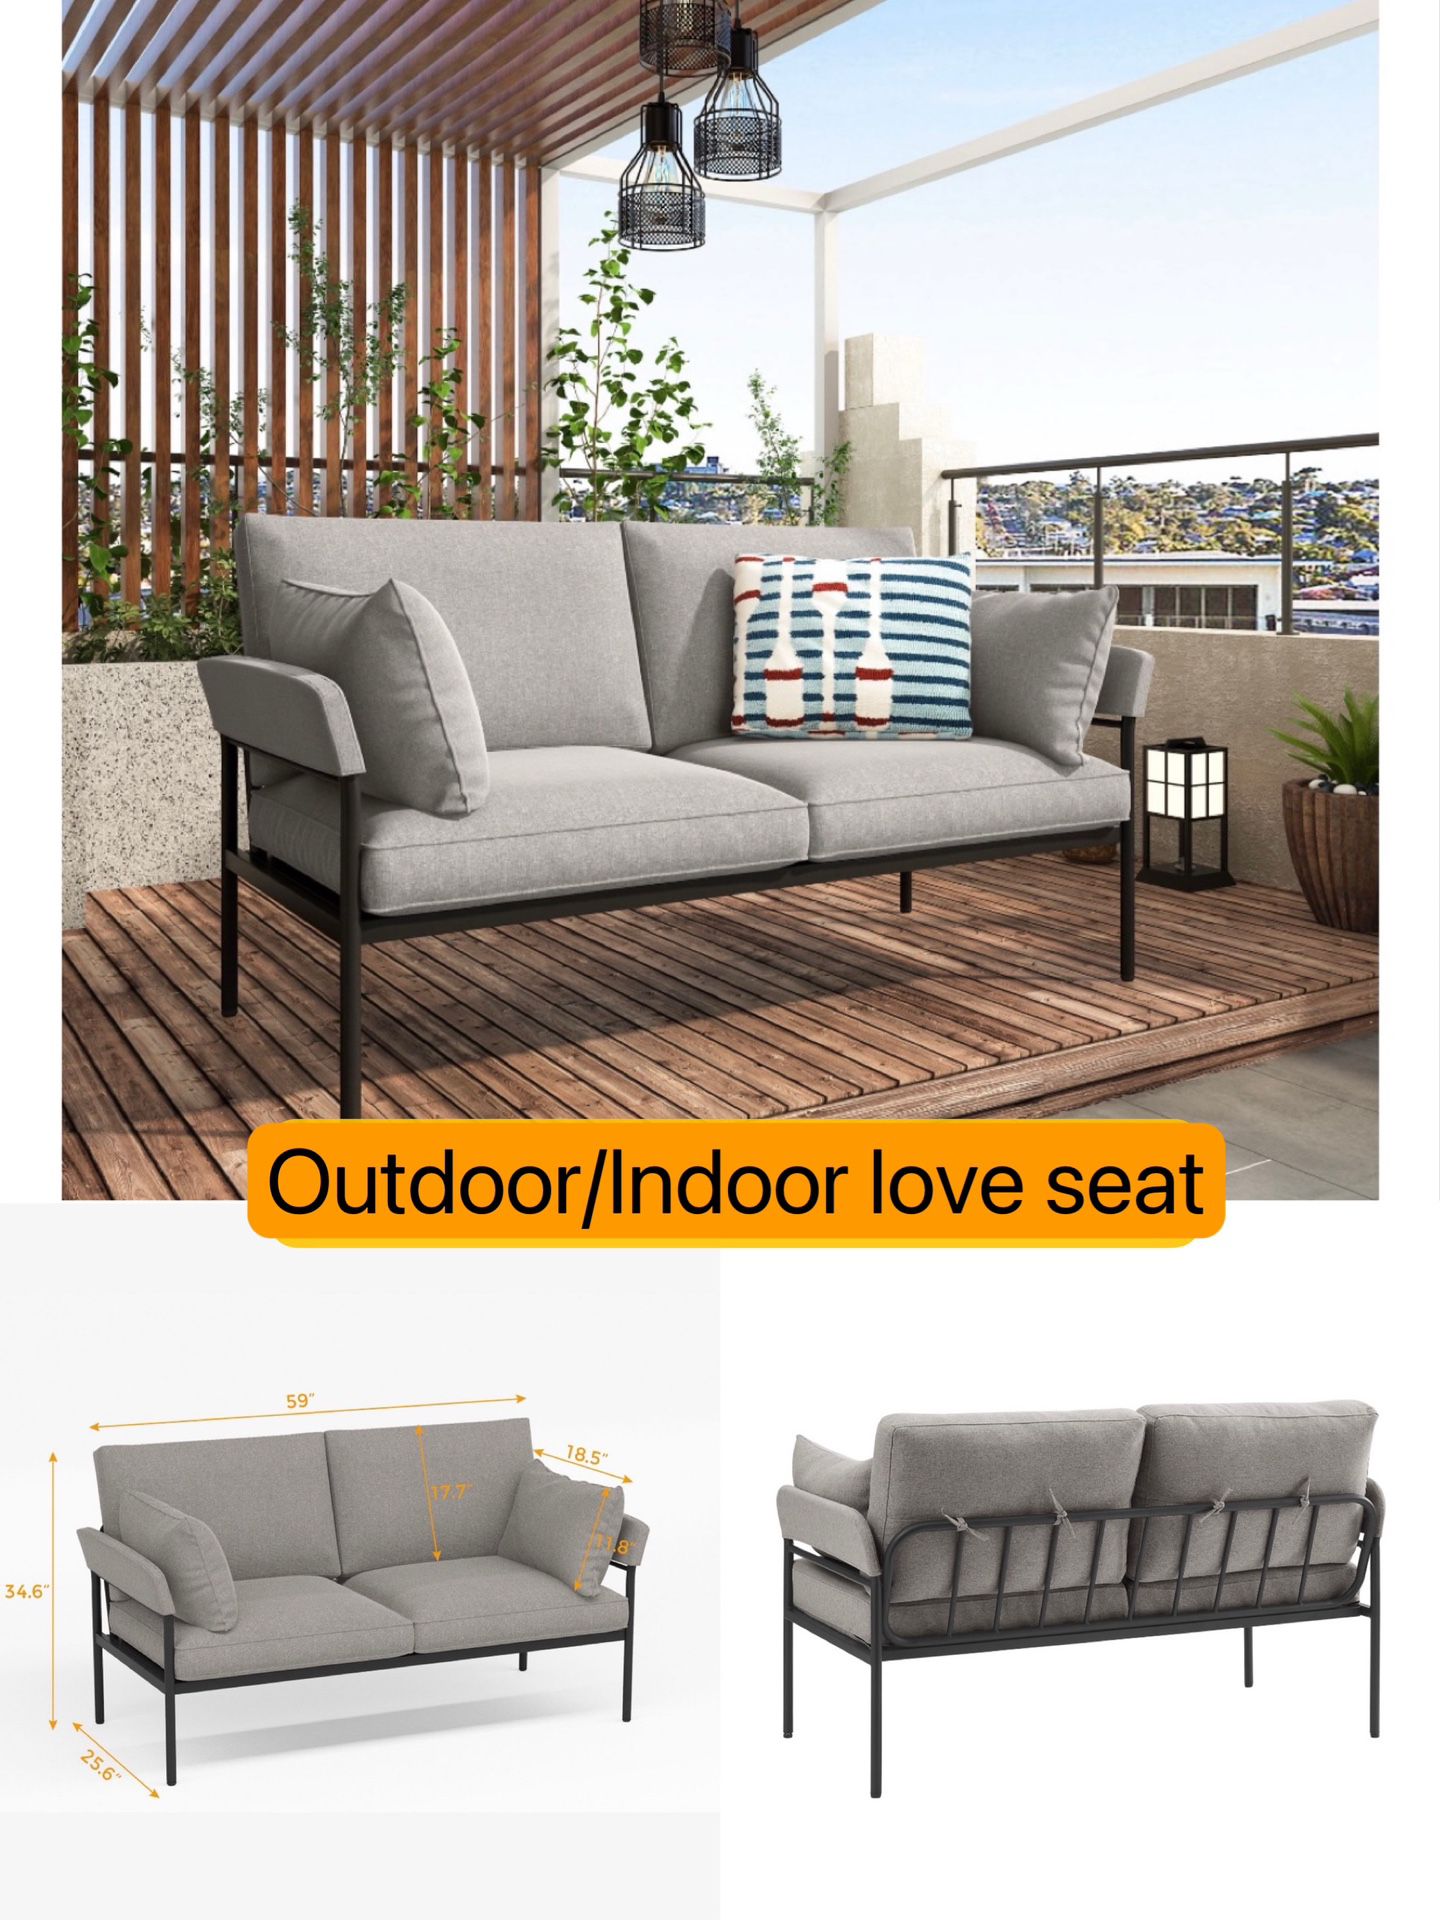 Outdoor/Indoor Love Seat Metal Frame Sofa With 2 Cushions 